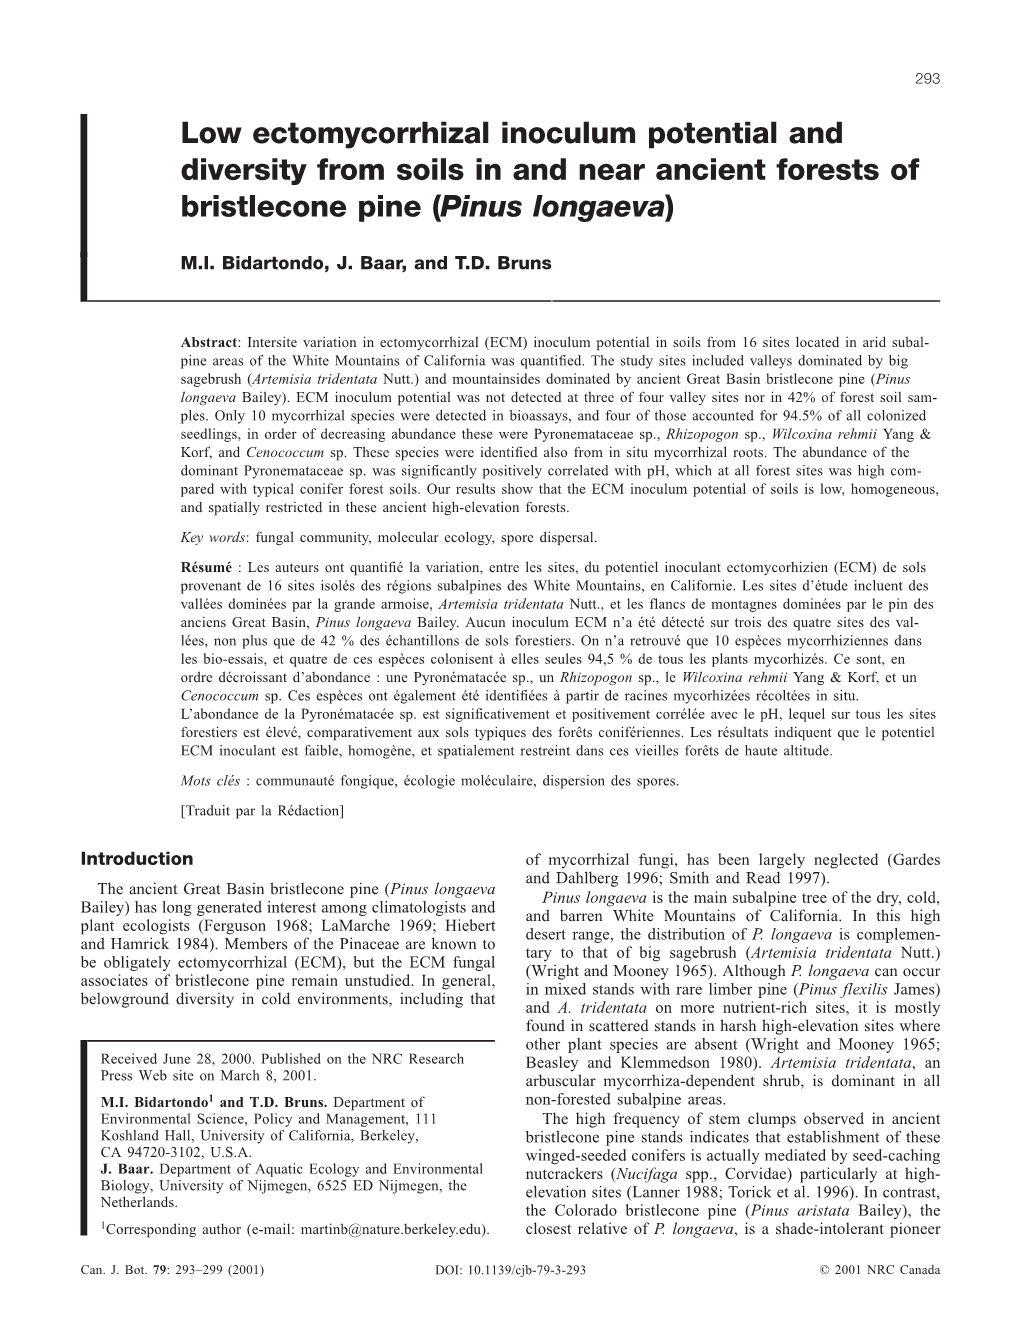 Low Ectomycorrhizal Inoculum Potential and Diversity from Soils in and Near Ancient Forests of Bristlecone Pine (Pinus Longaeva)